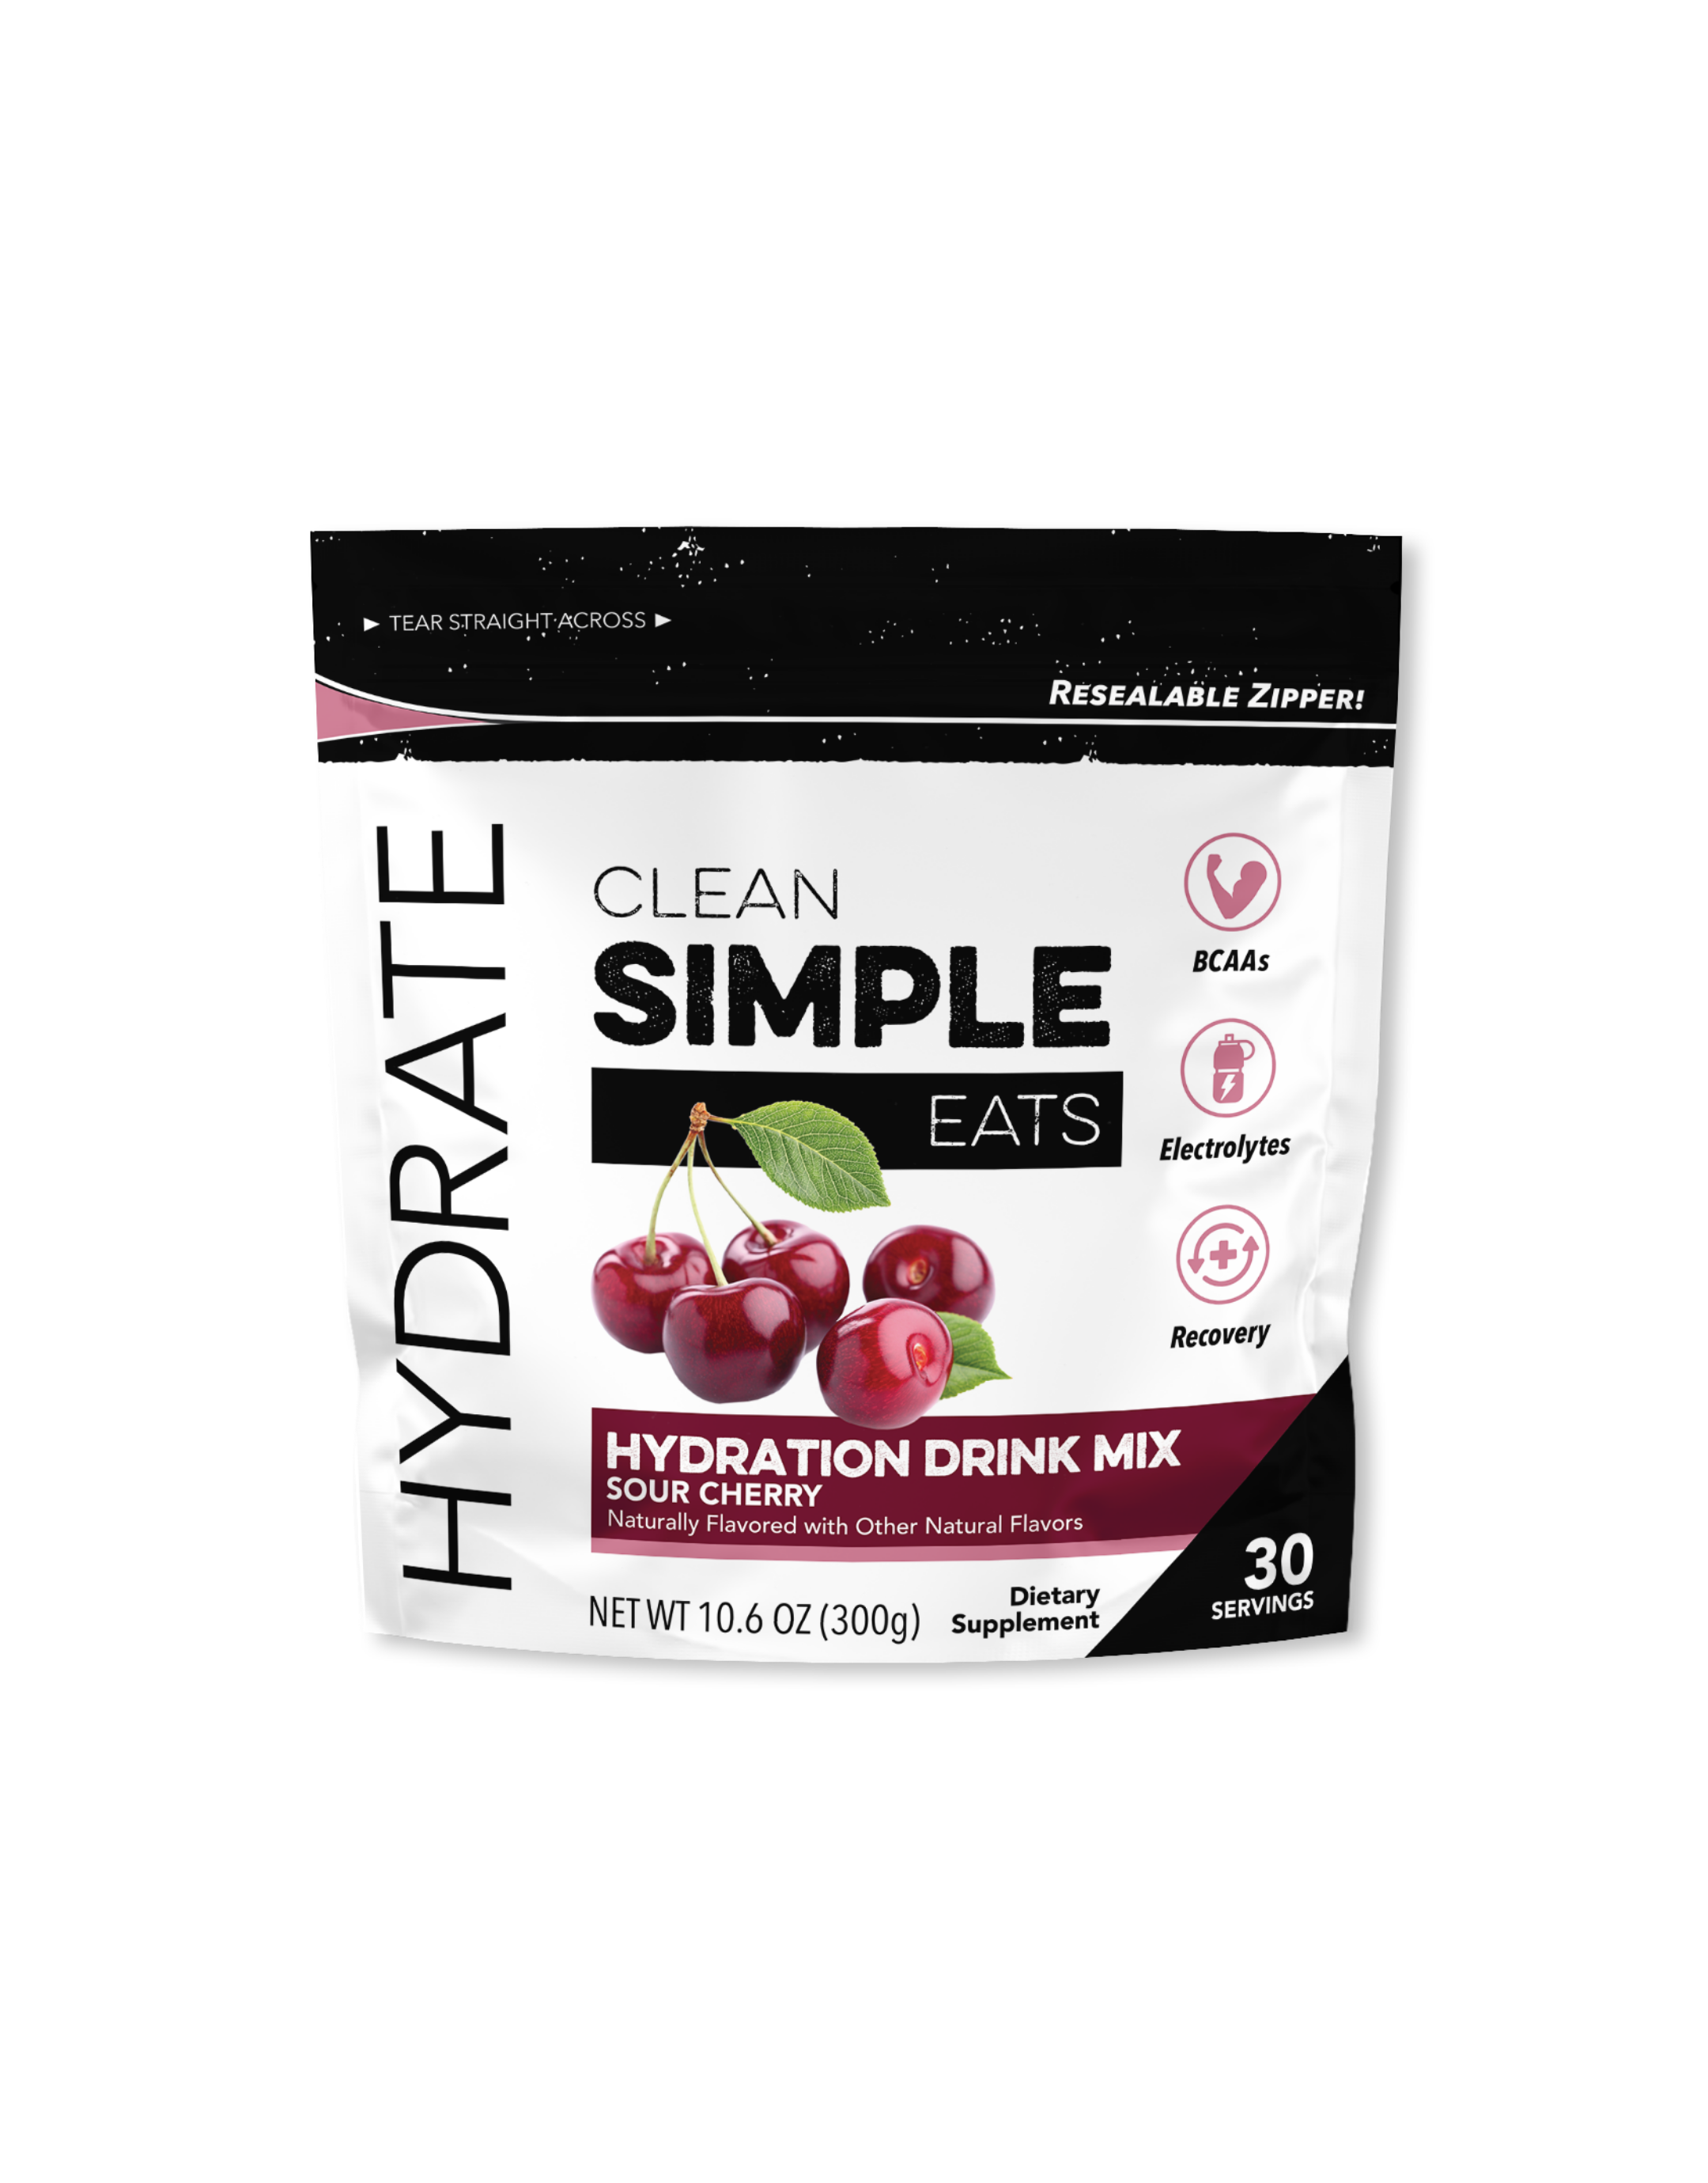 Hydrate: Sour Cherry Hydration Drink Mix (30 Serving Bag)